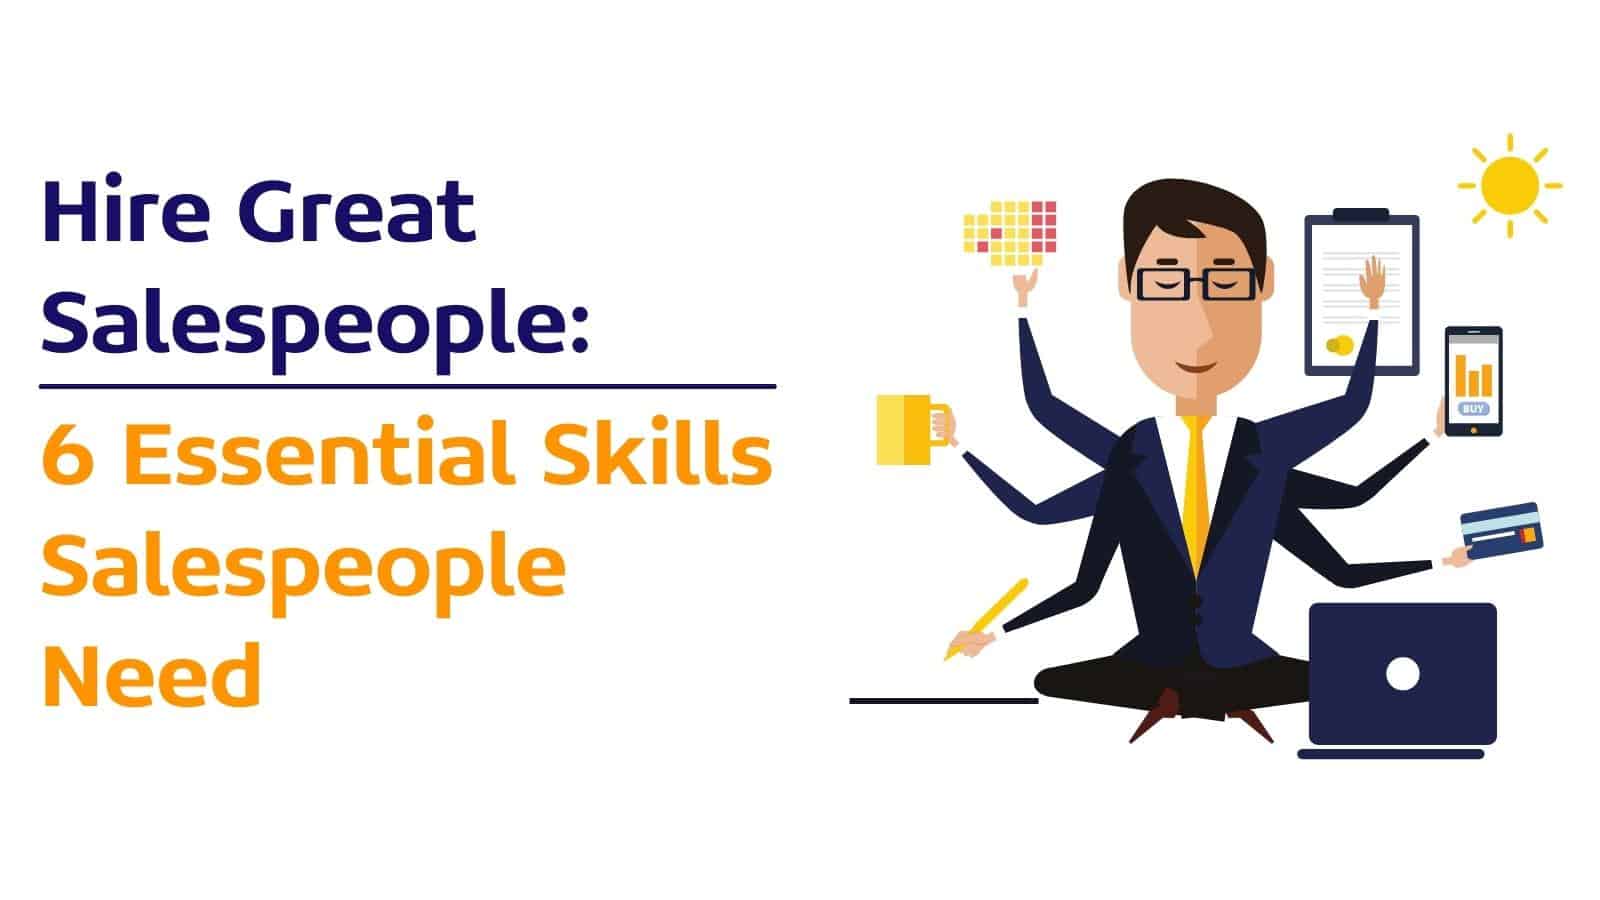 Hire Great Salespeople: 6 Skills Every Salesperson Needs